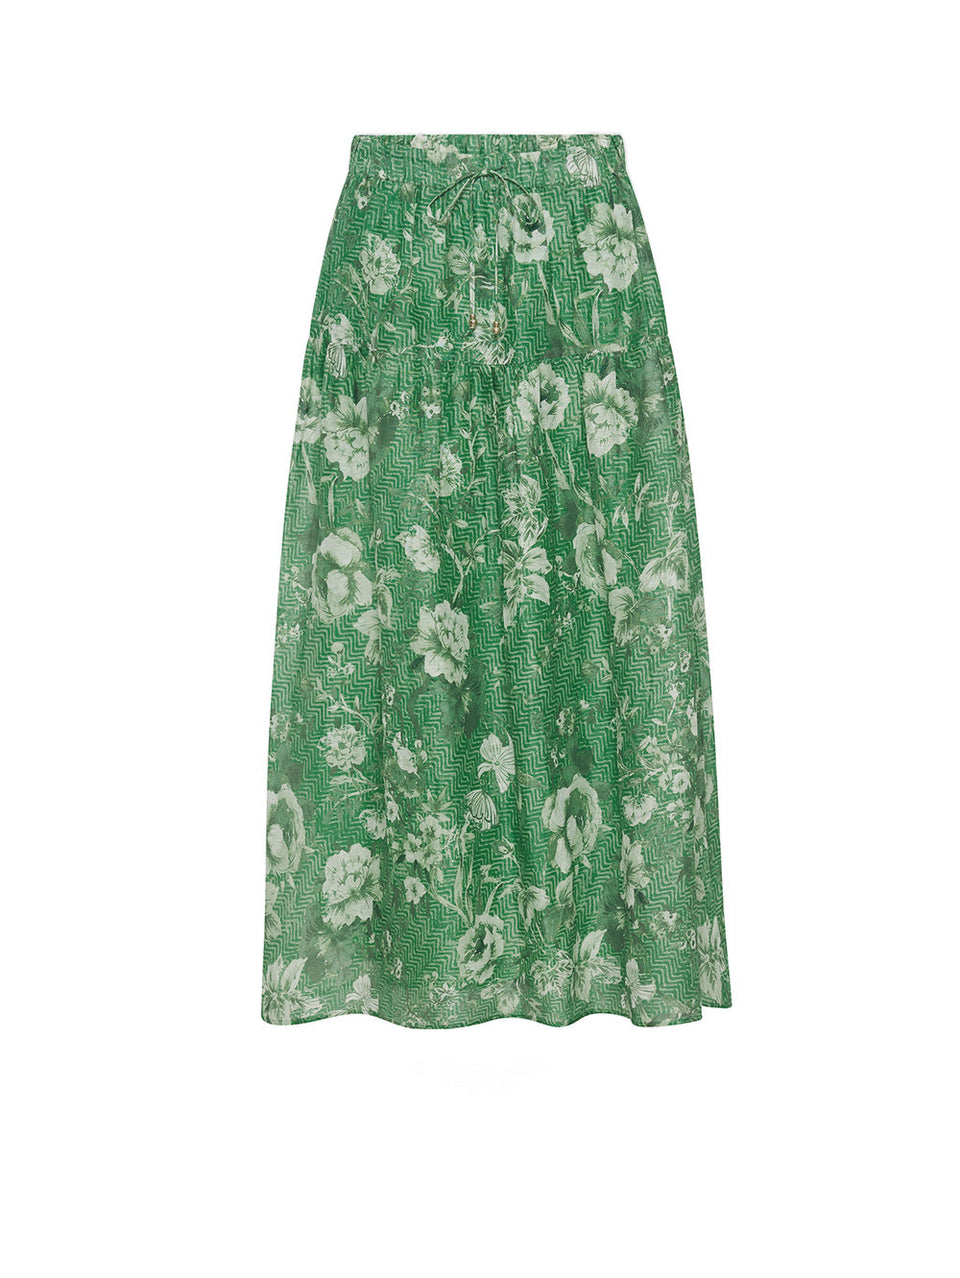 Ghost image of KIVARI Khalo Midi Skirt: A green floral midi skirt featuring an elasticated drawstring waist with gold bead ends and a gathered tiered skirt.